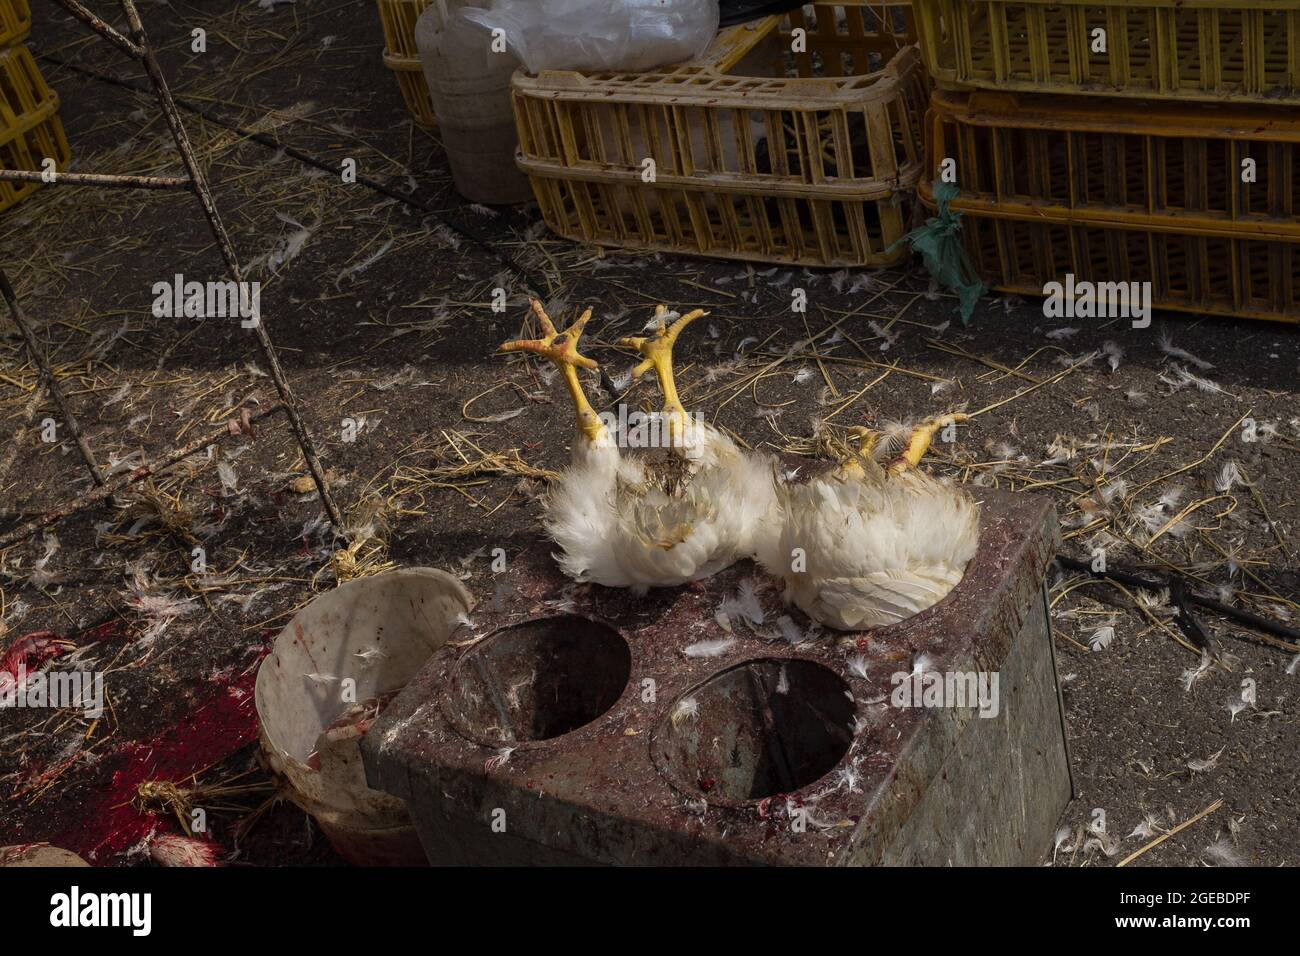 Two chickens killed in a meat market Stock Photo